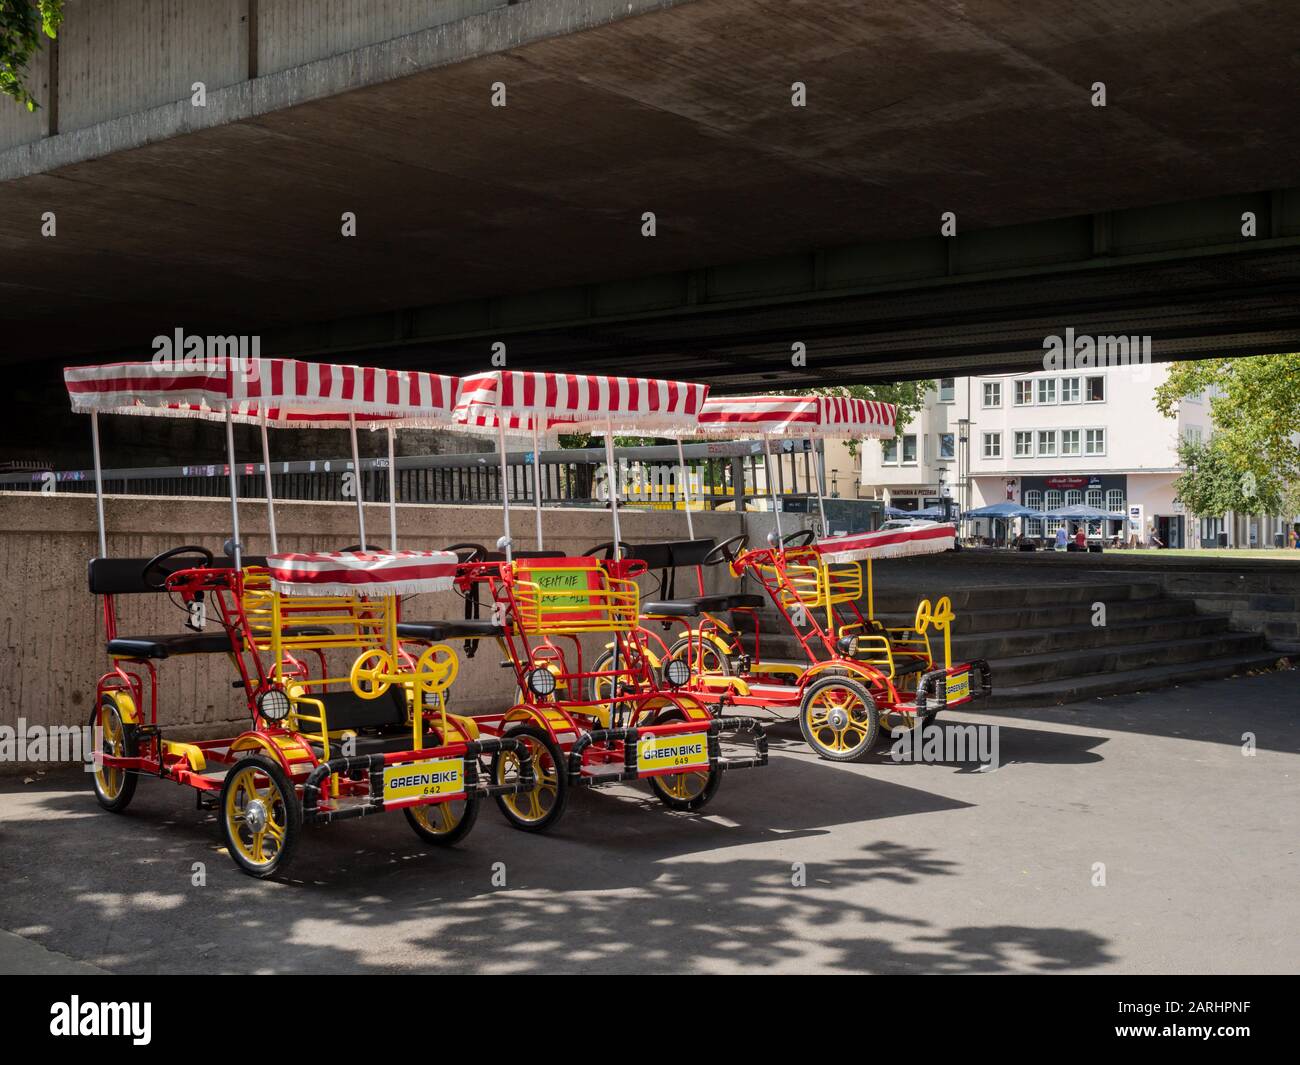 COLOGNE, GERMANY - JULY 05, 2019:  Quadracycle, four-wheeled human-powered bikes, for hire to tourists as a green alternative way to see the city Stock Photo